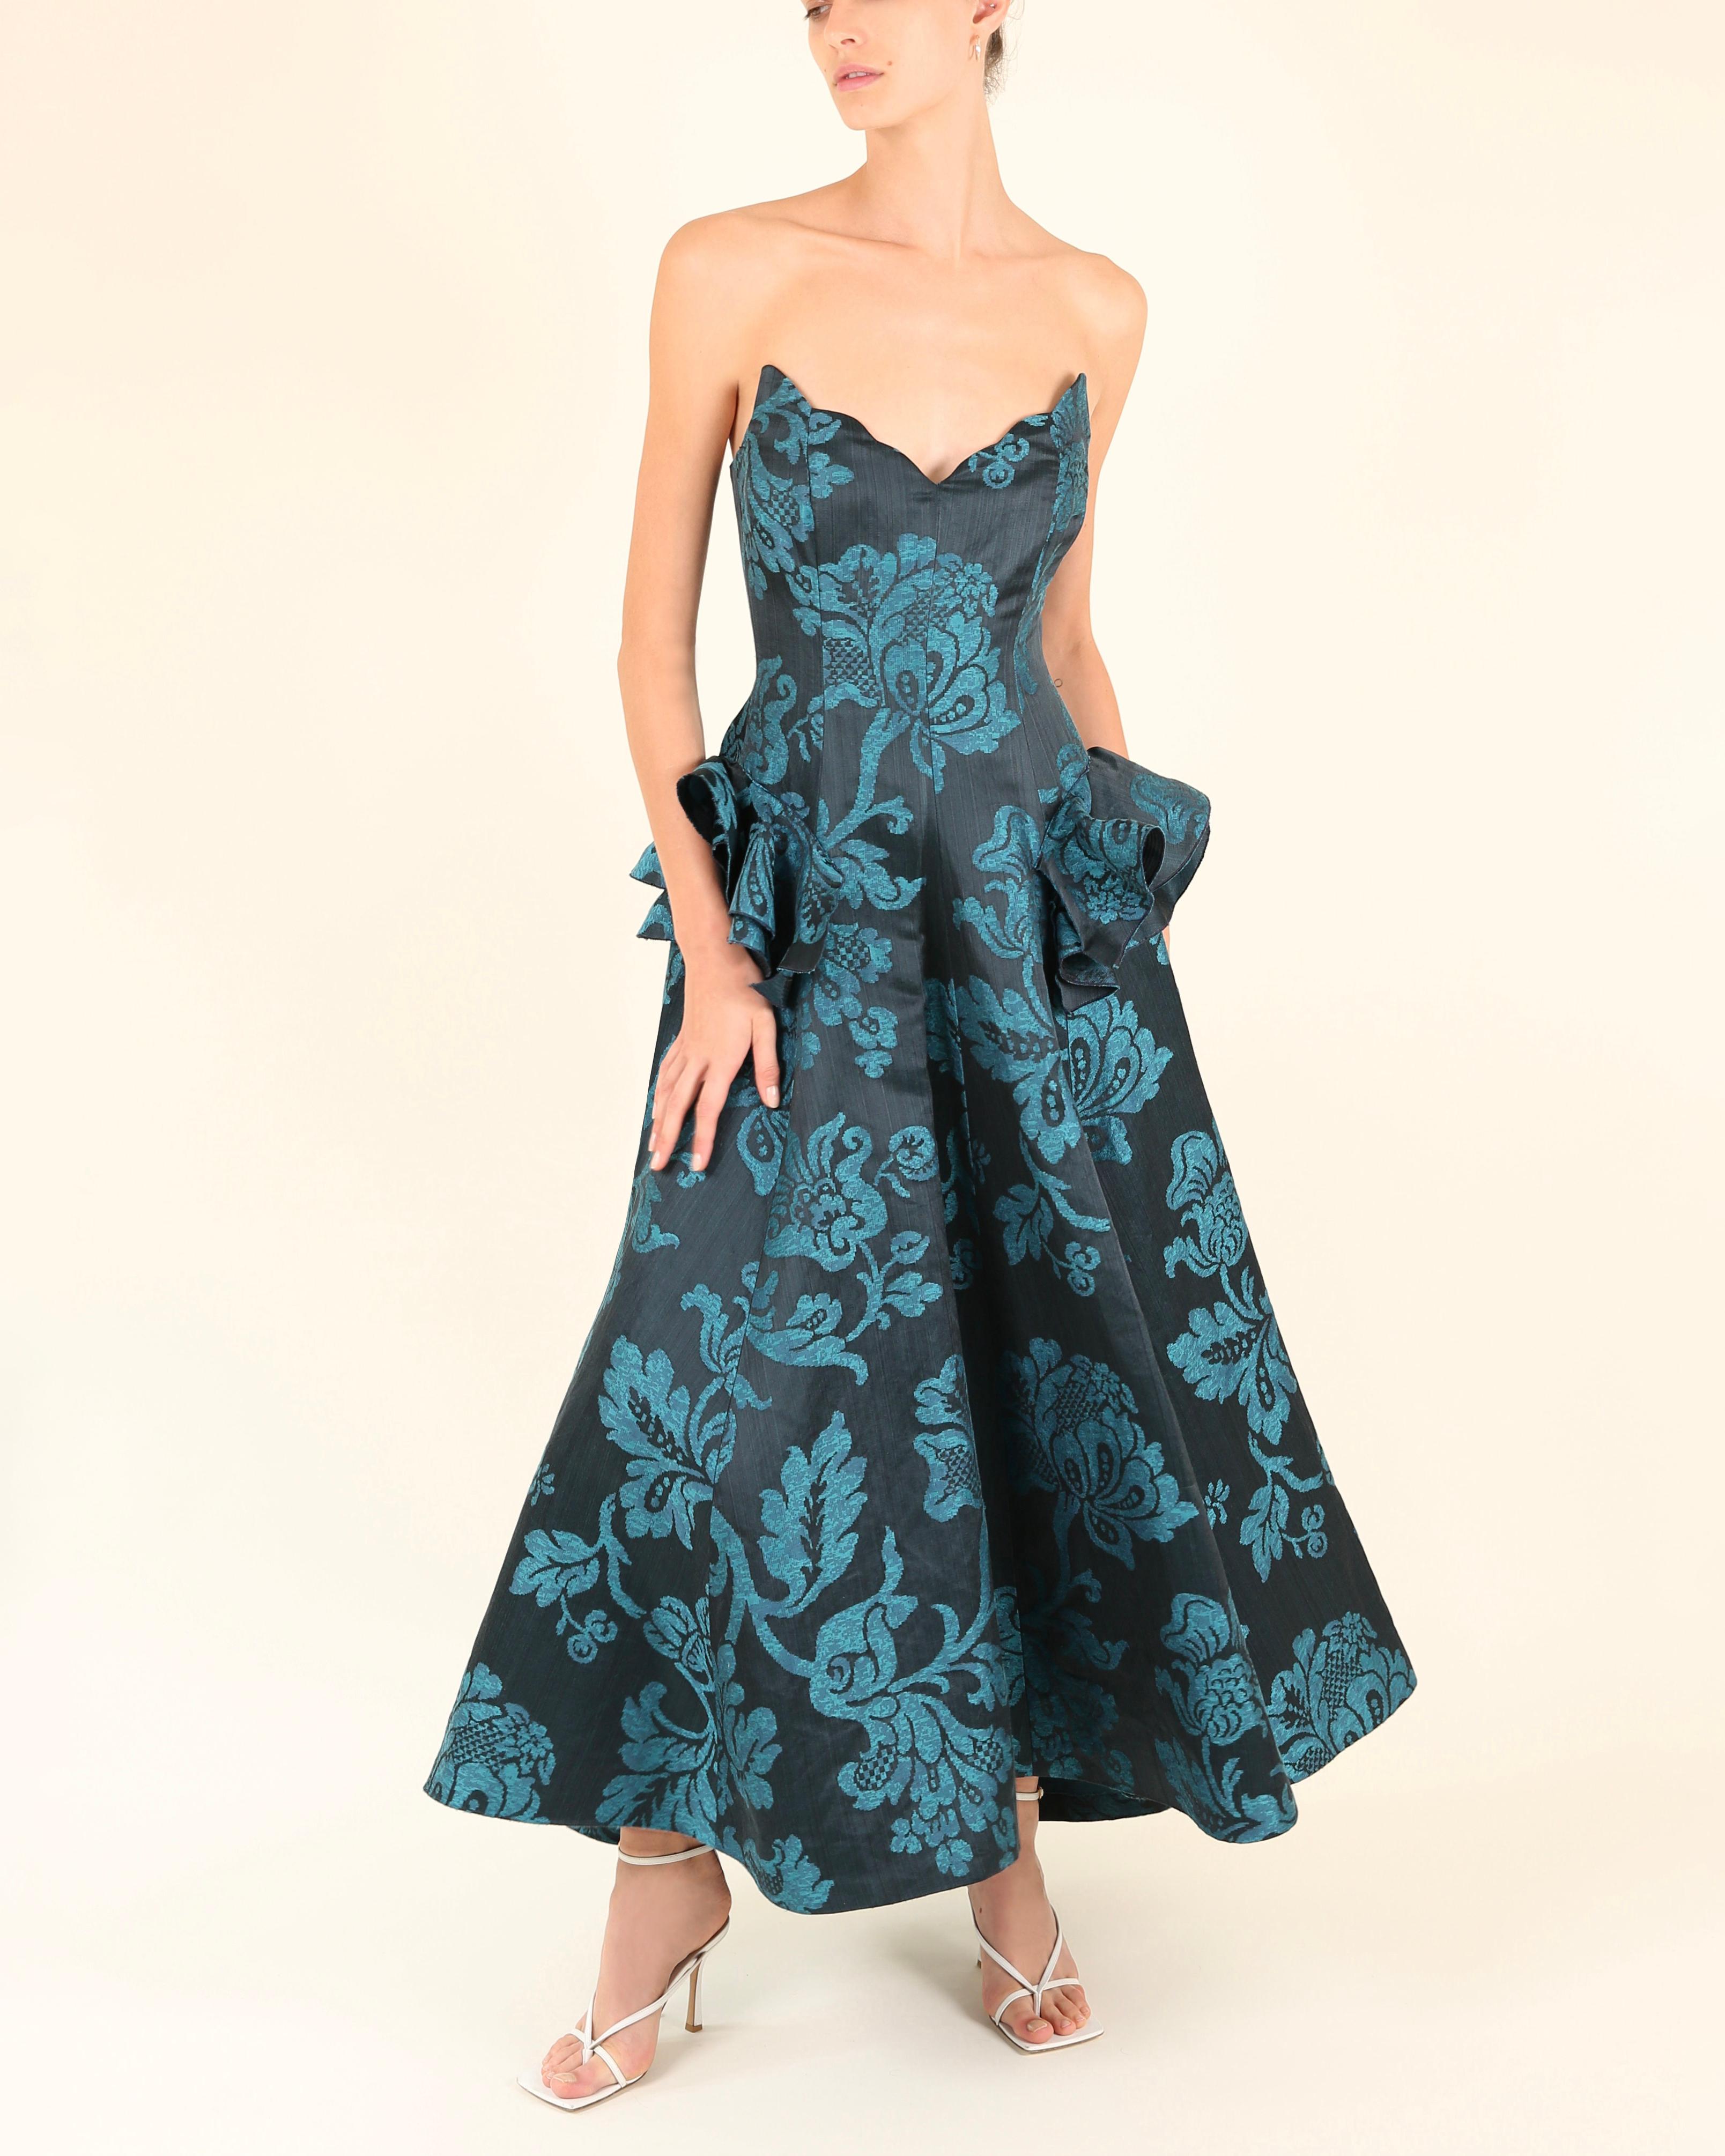 Oscar de la Renta F/W06 strapless floral blue teal fit and flare dress gown XS For Sale 2